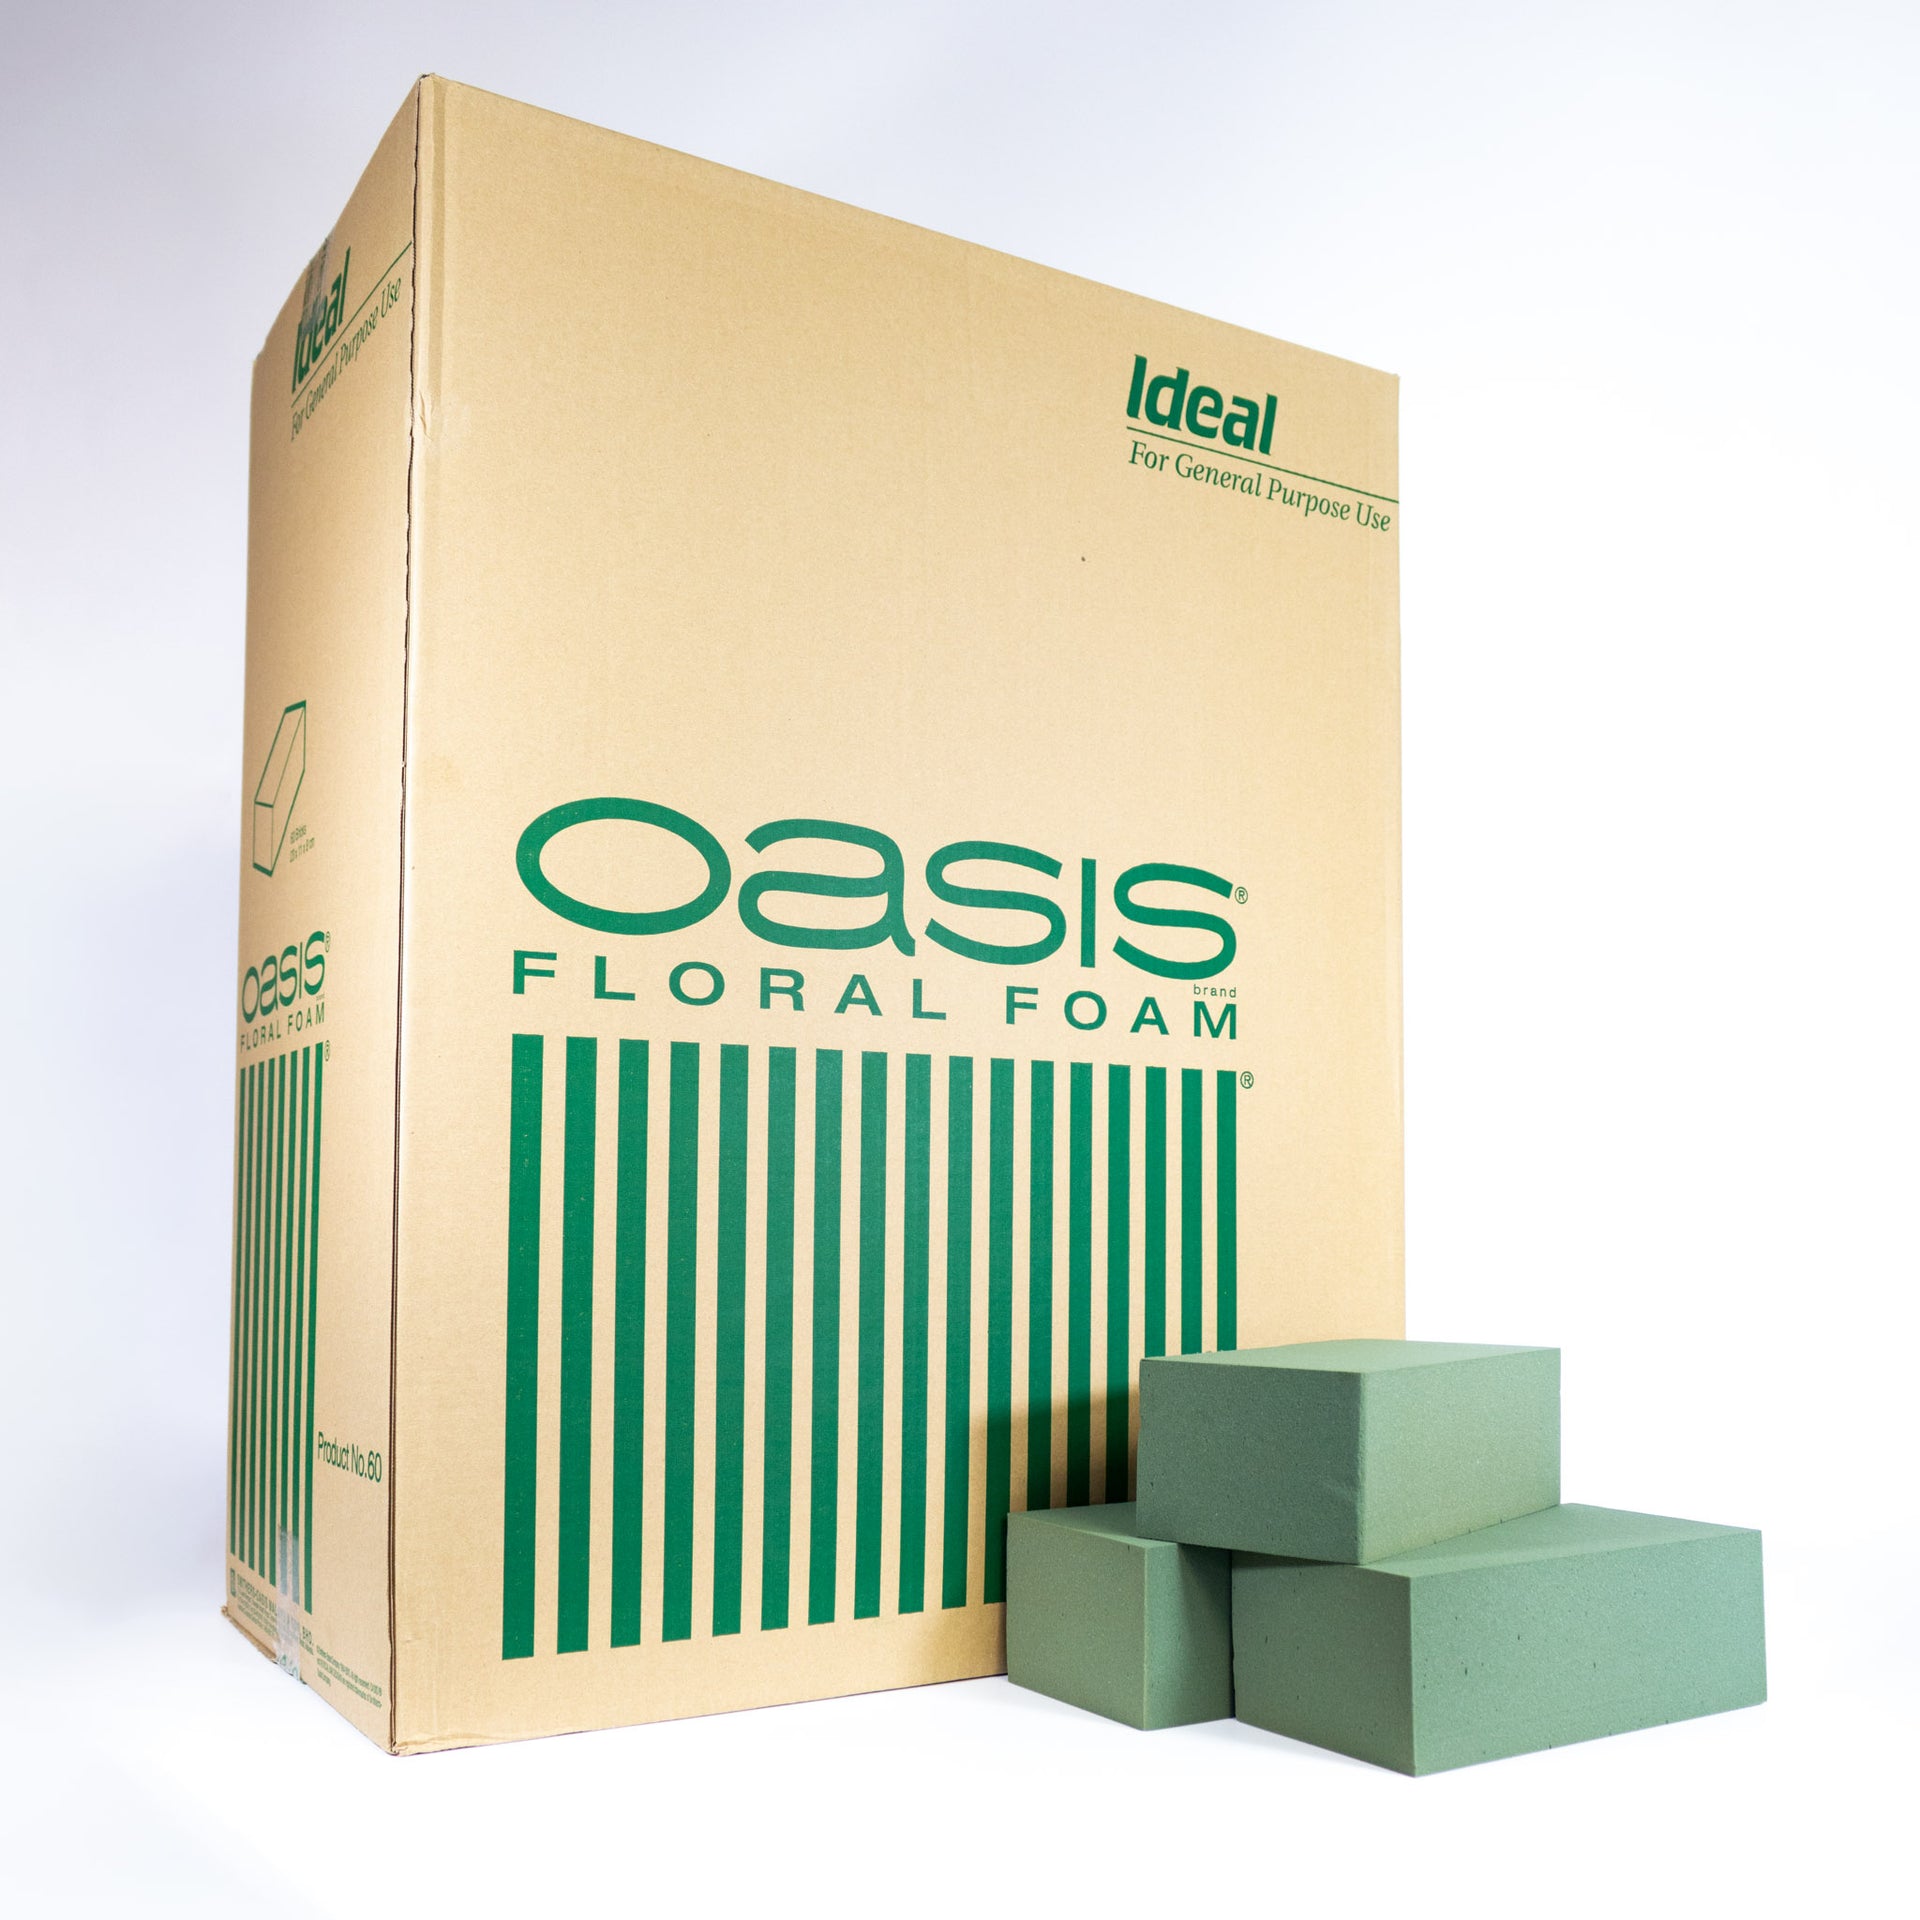 OASIS Indocell Floral Foam & OASIS Floral Products - Indonesia - OASIS®  Cone. www.barangflorist.com